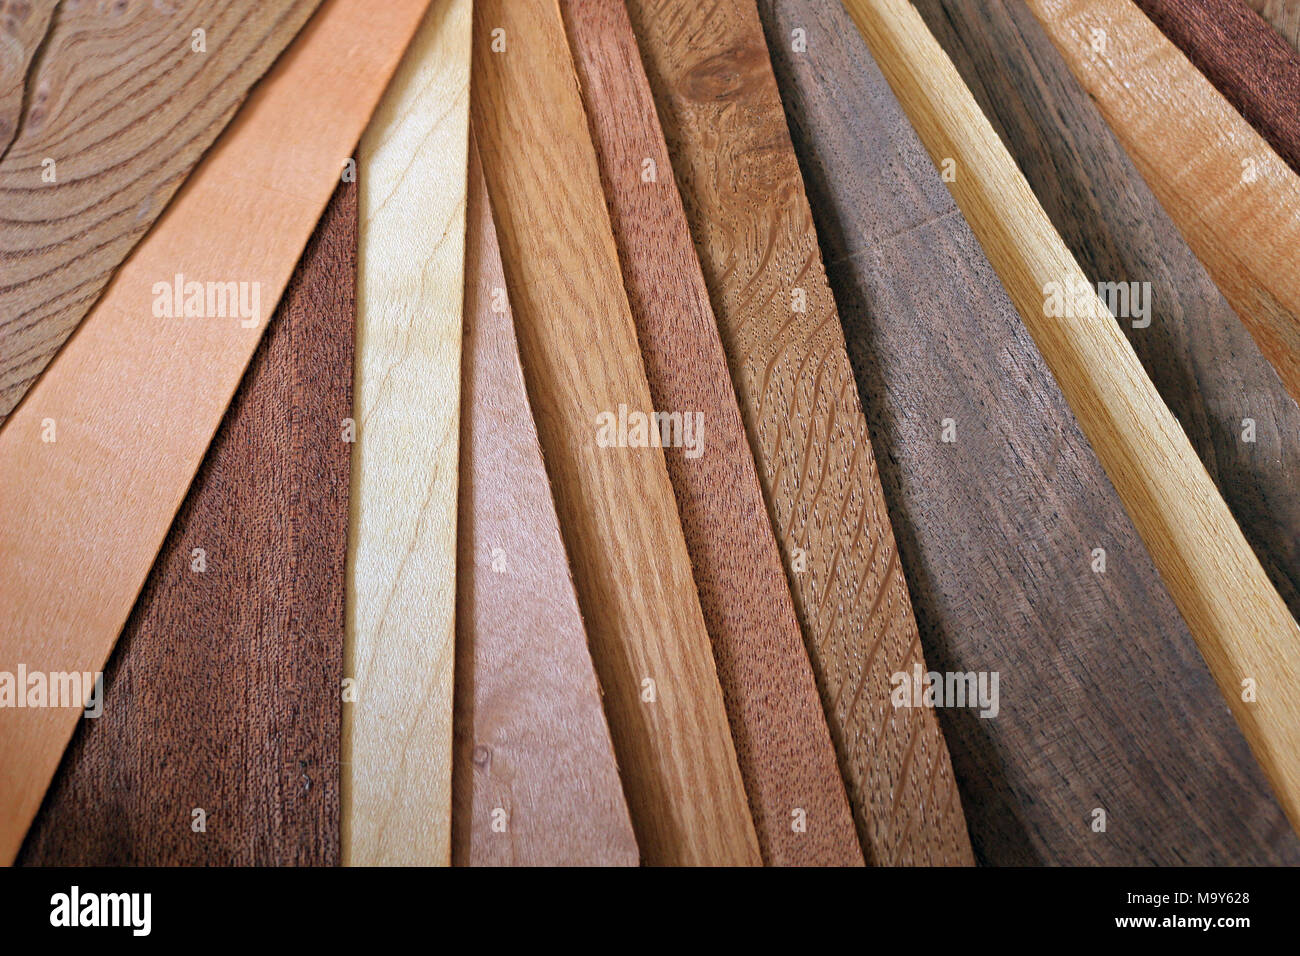 Sheets of Different Woods Stock Photo